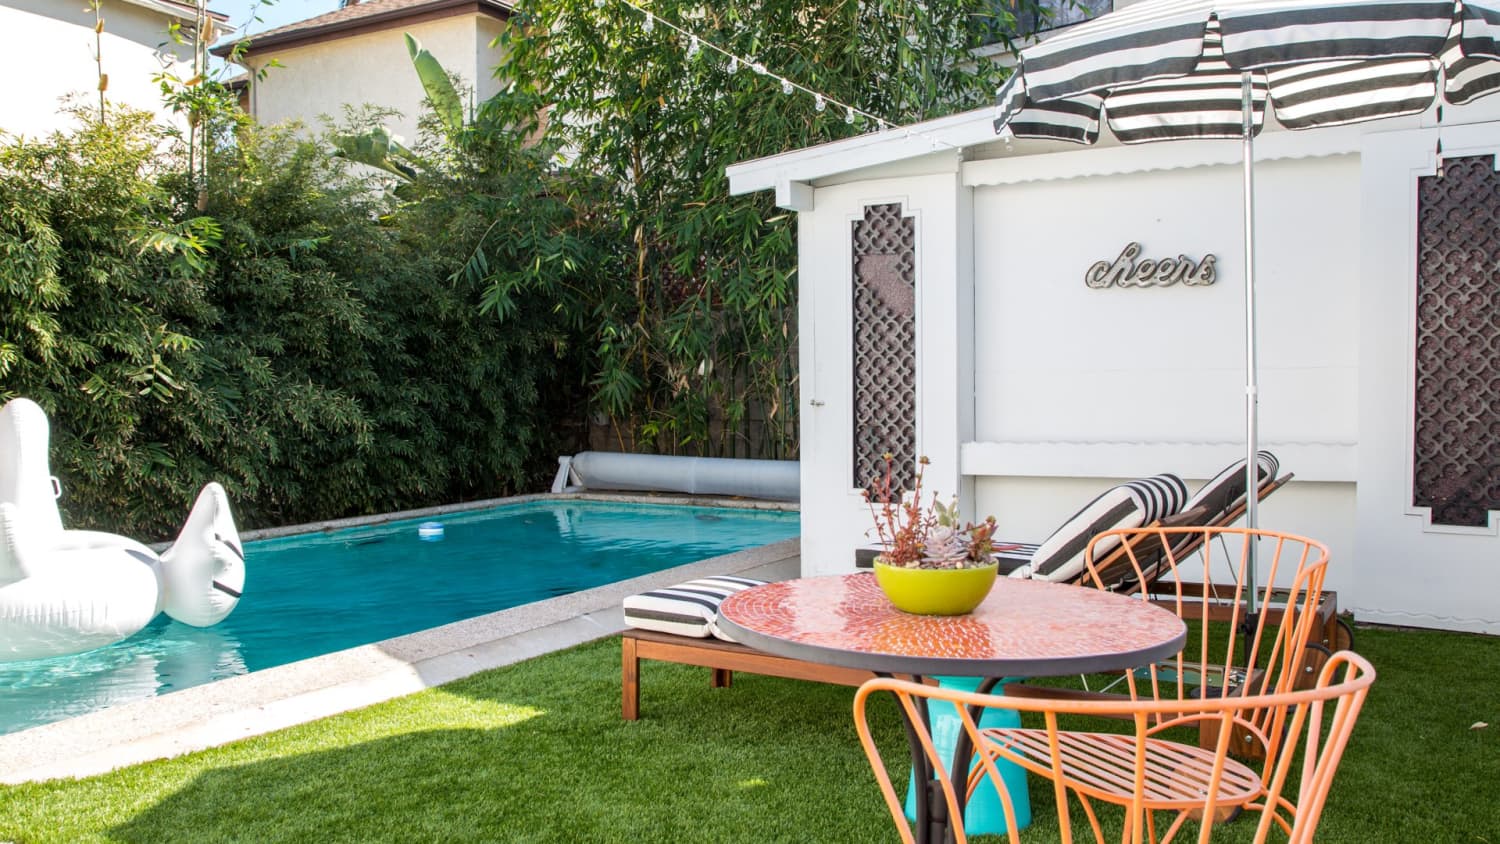 12 Small Backyard Pool Ideas How To Fit A Pool In A Small Yard Apartment Therapy